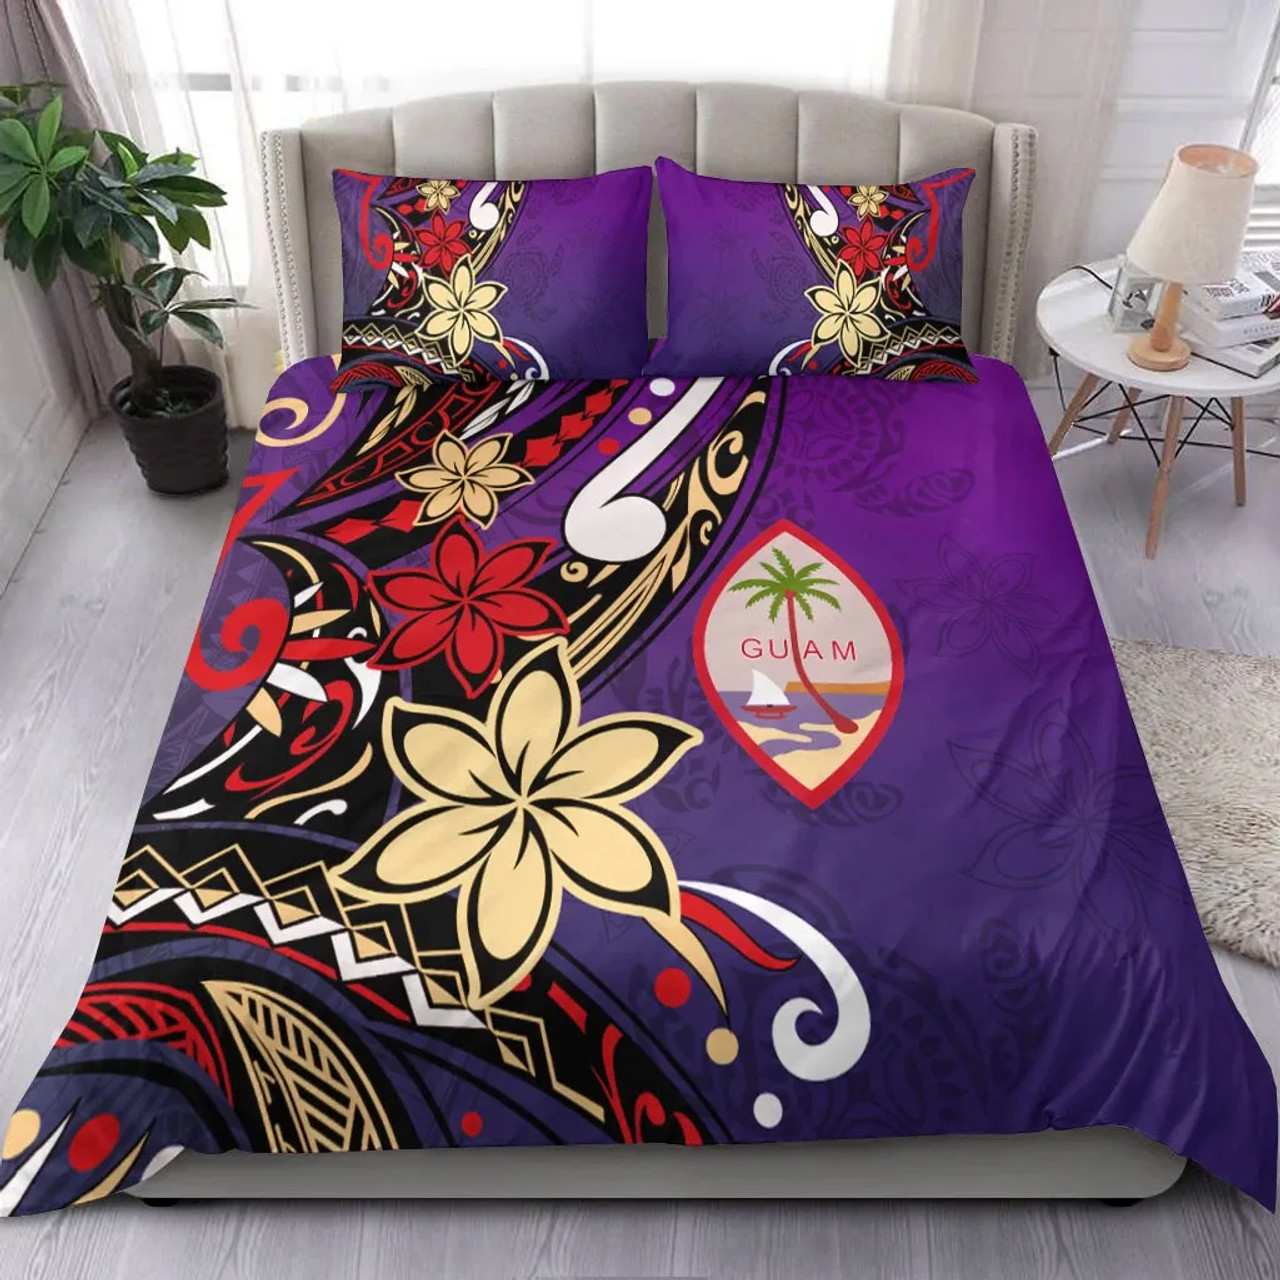 Guam Bedding Set - Tribal Flower With Special Turtles Purple Color 1